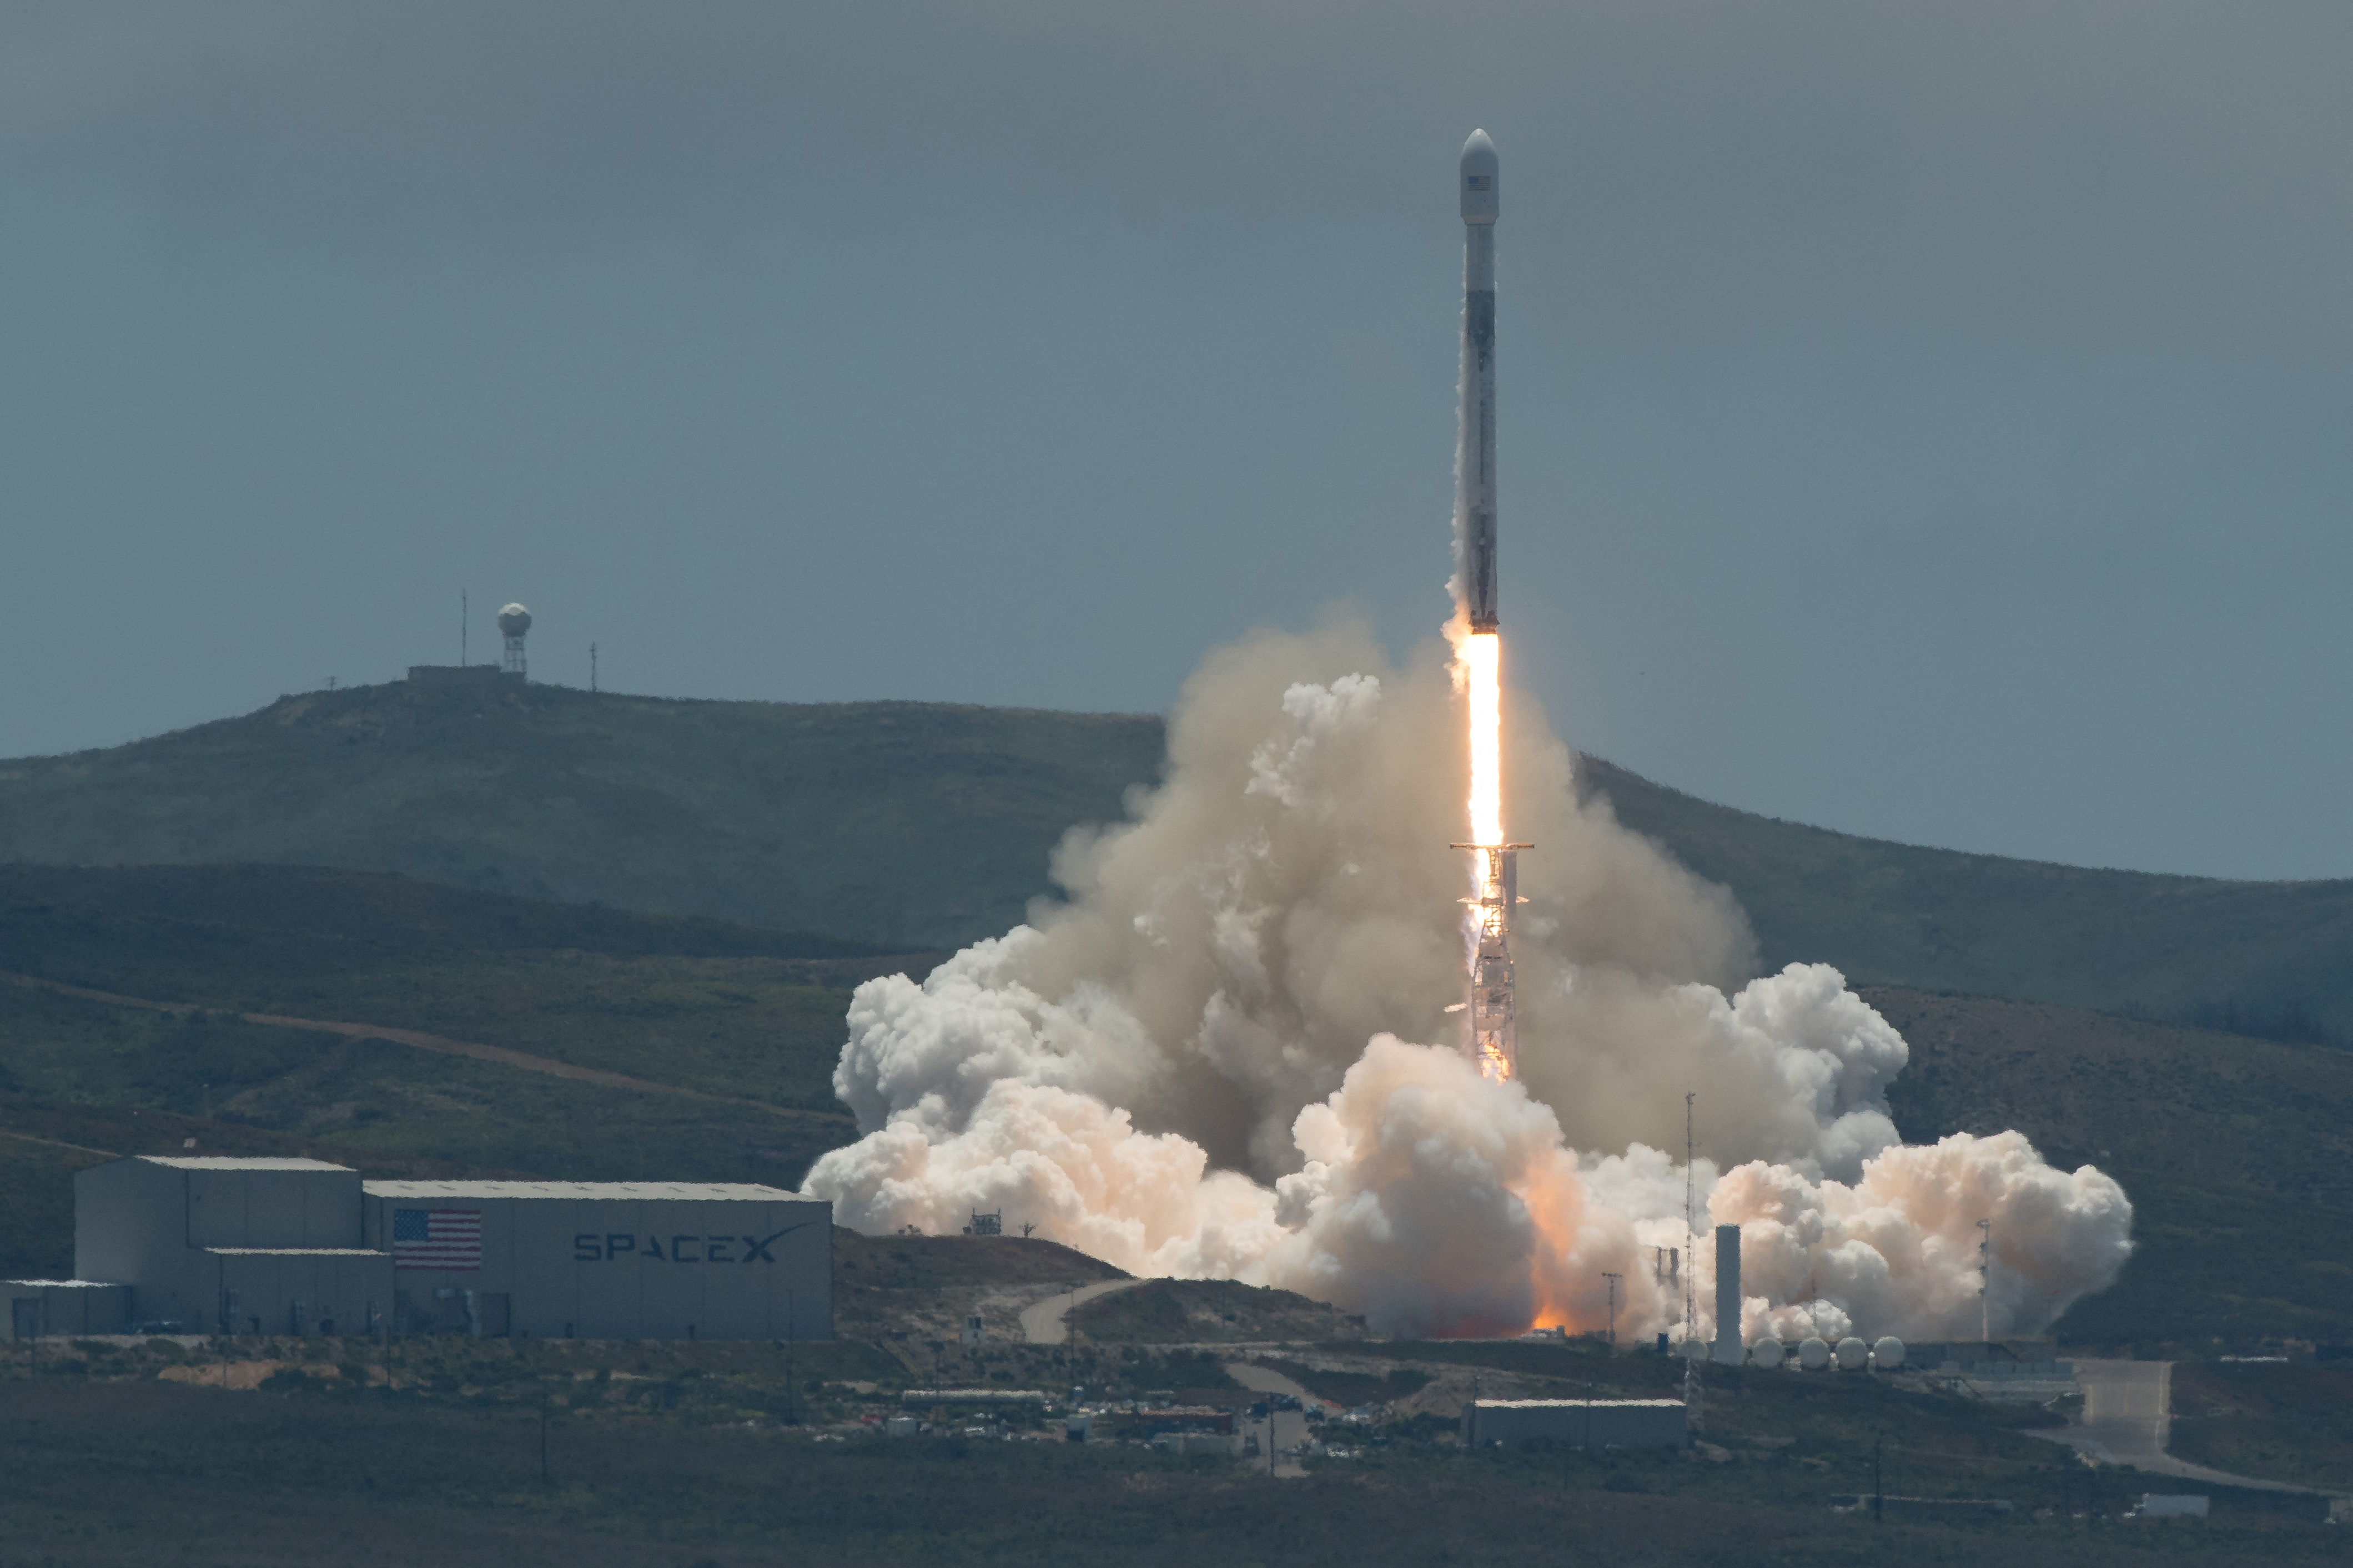 A SpaceX Falcon 9 rocket lifts off carrying the NASA/German Research Centre for Geosciences GRACE Follow-On spacecraft from Space Launch Complex 4E at Vandenberg Air Force Base